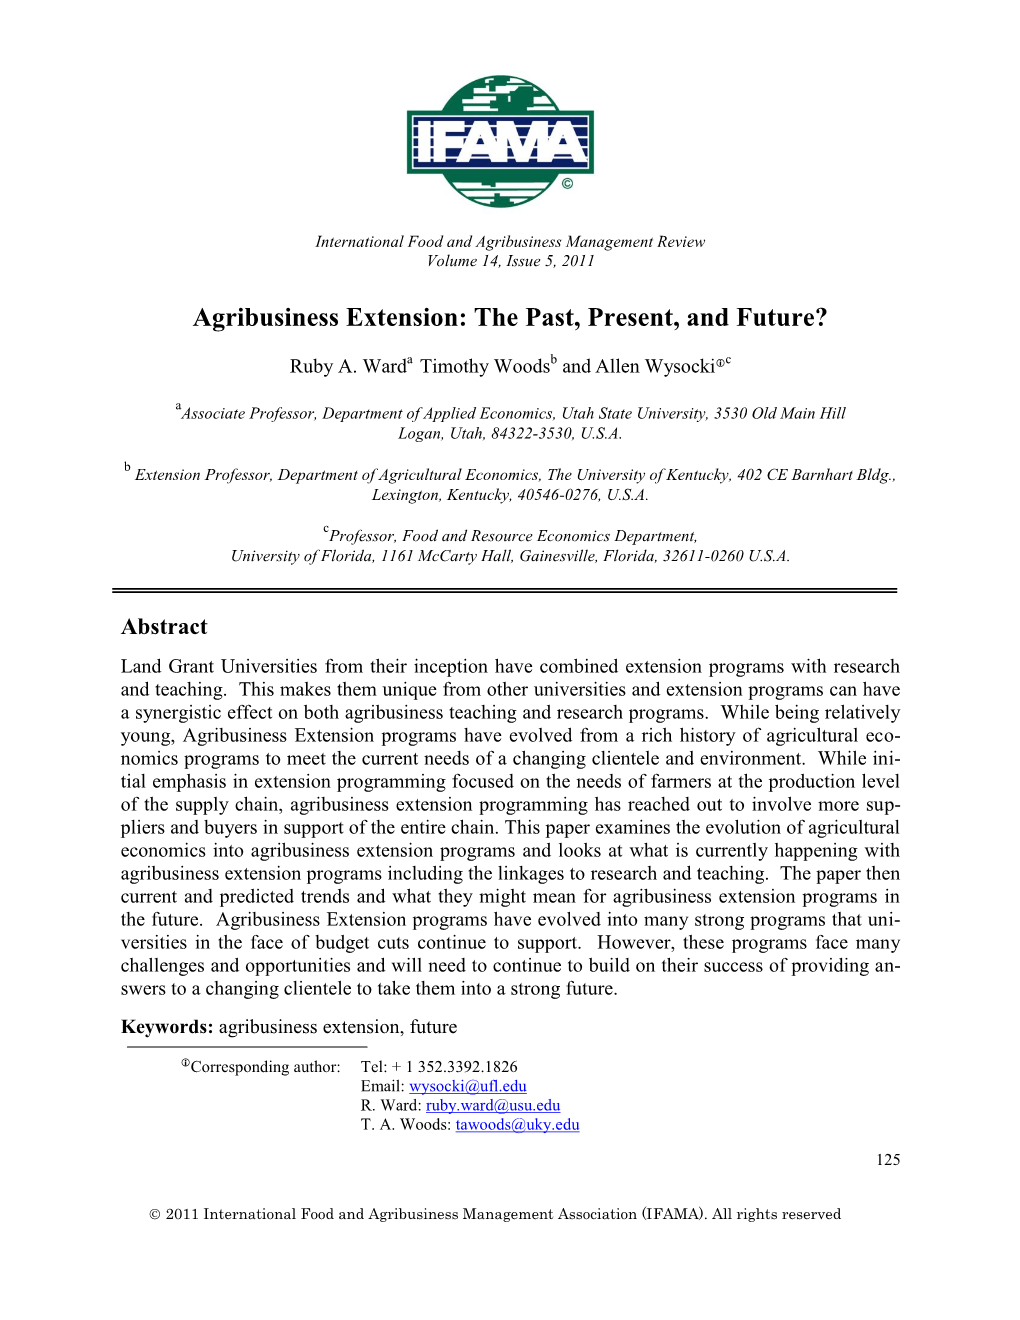 Agribusiness Extension: the Past, Present, and Future?